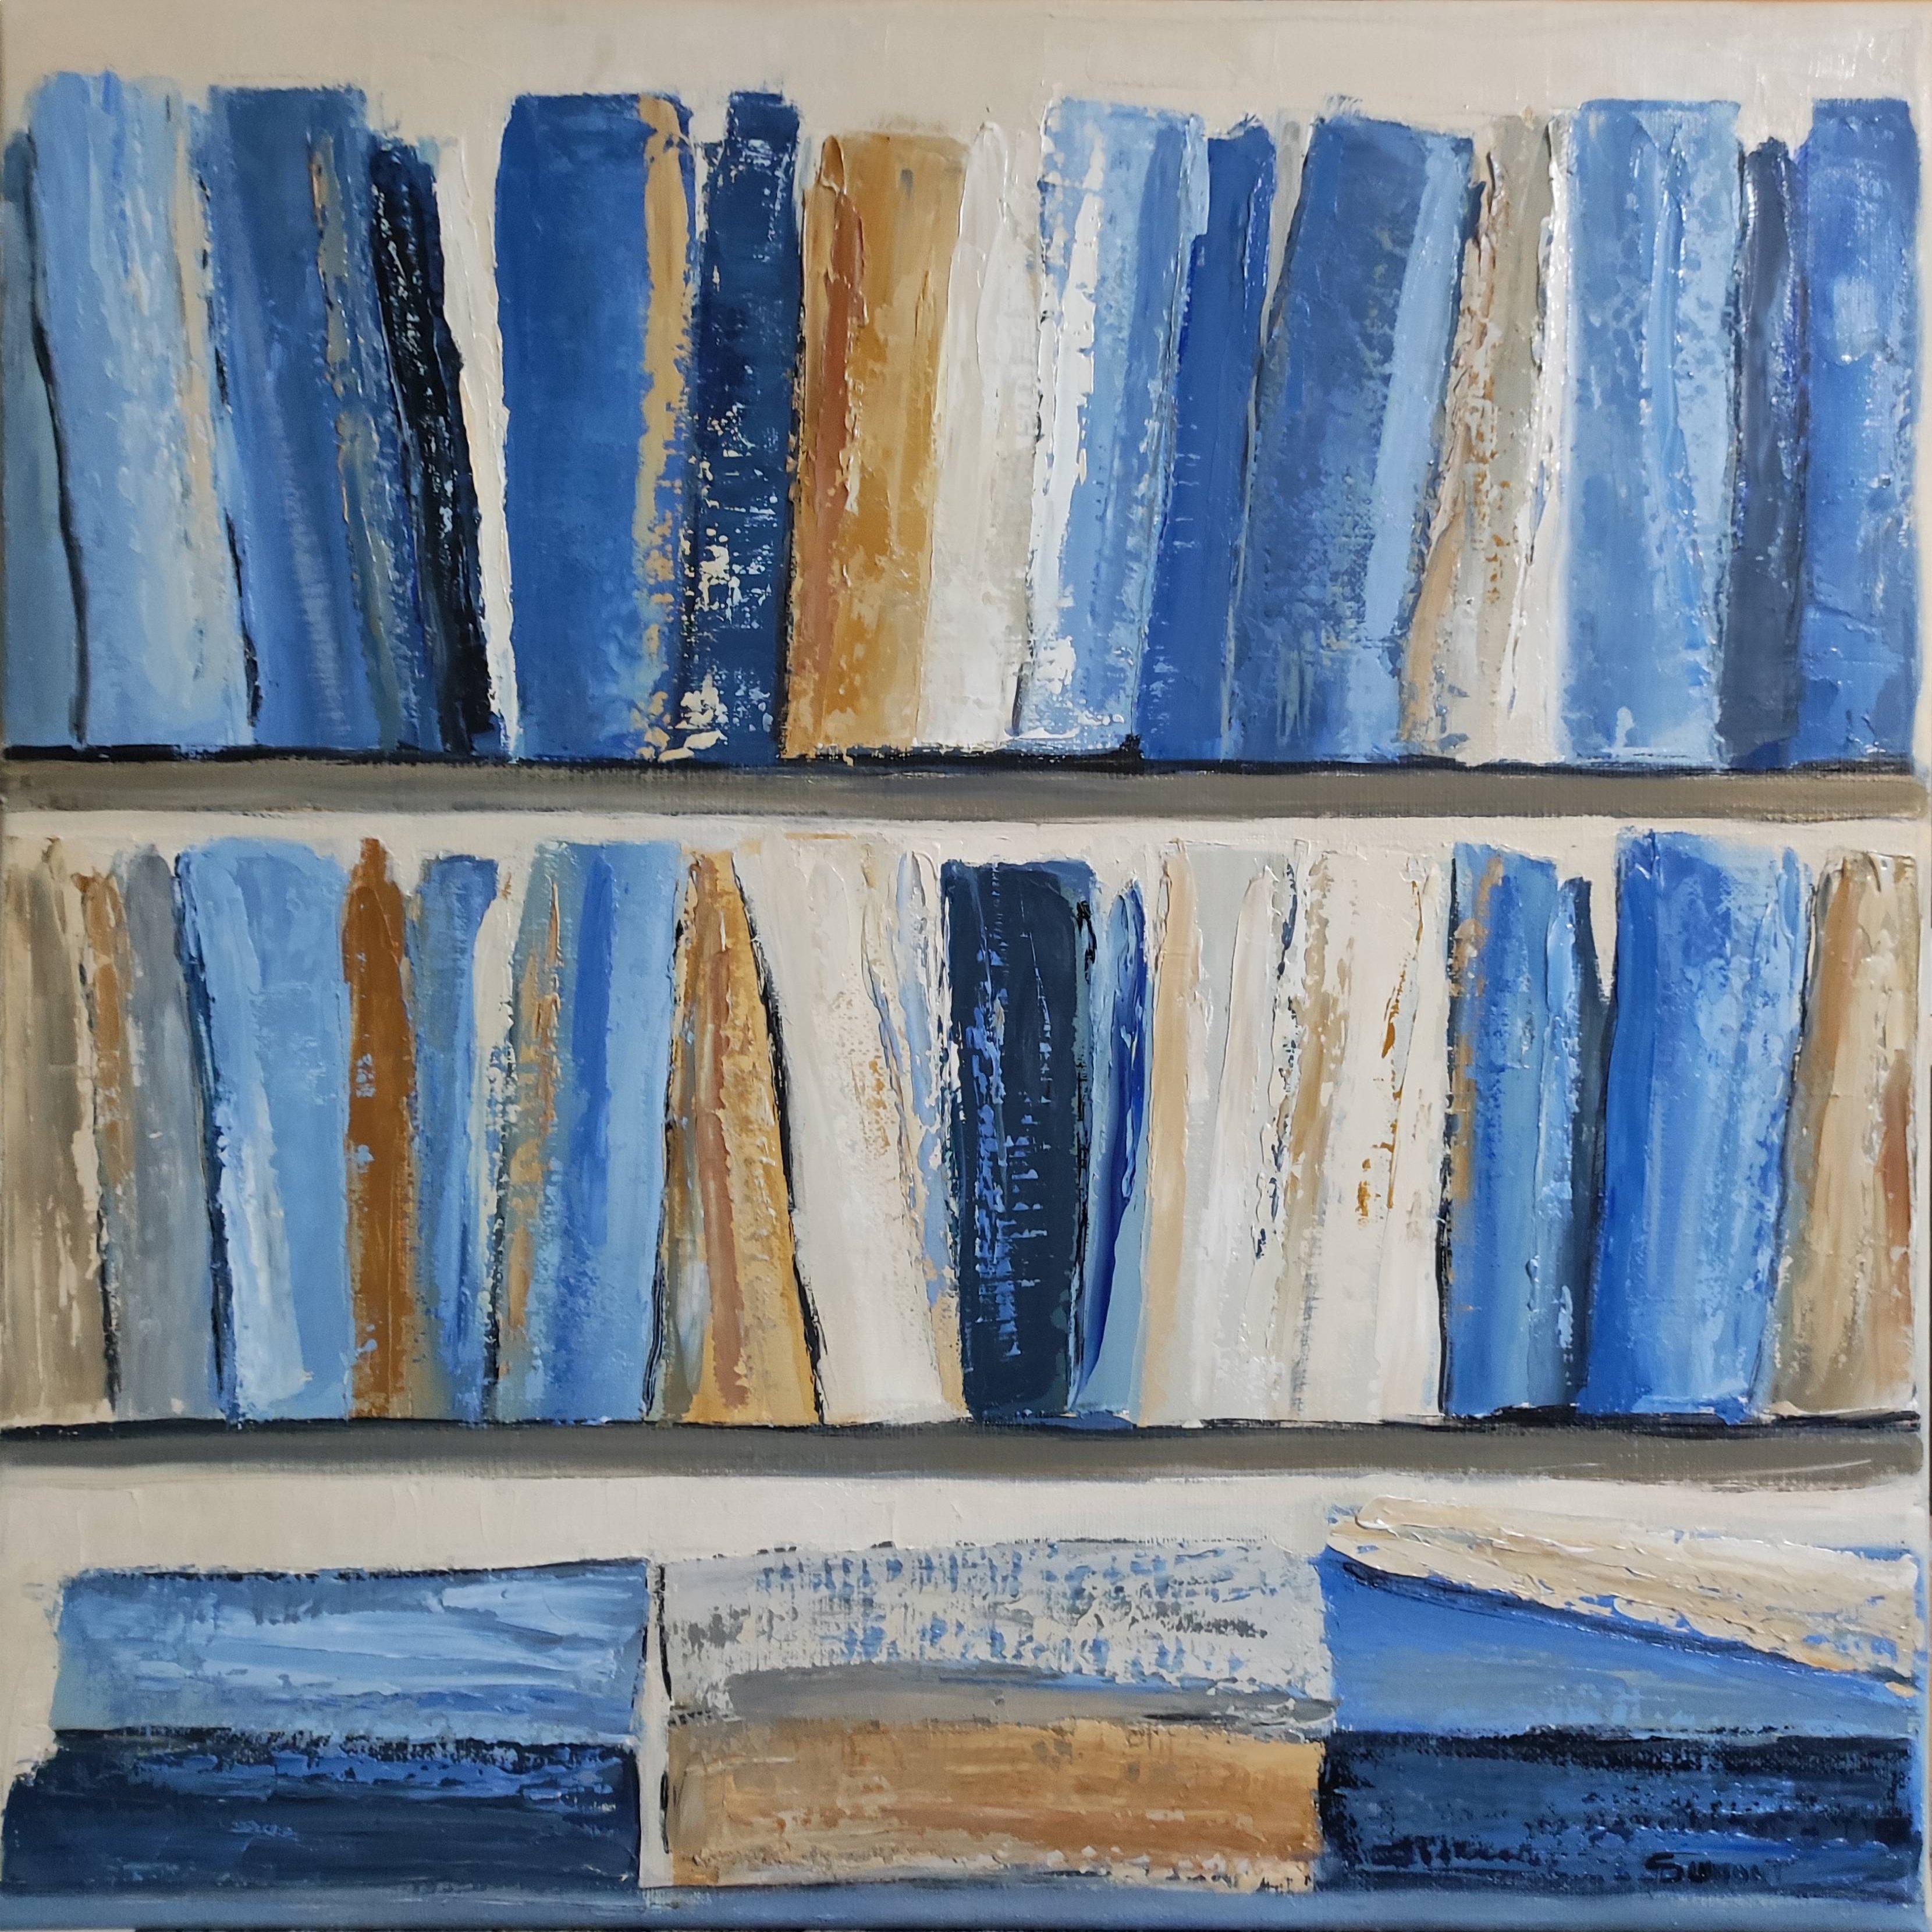 Semi-abstract painting on the theme of books in a library.
Ephemera are often treated in collections and the artist strives to give these sometimes unusual writings a second, more lasting life.
She brings them together in collections in a harmony of